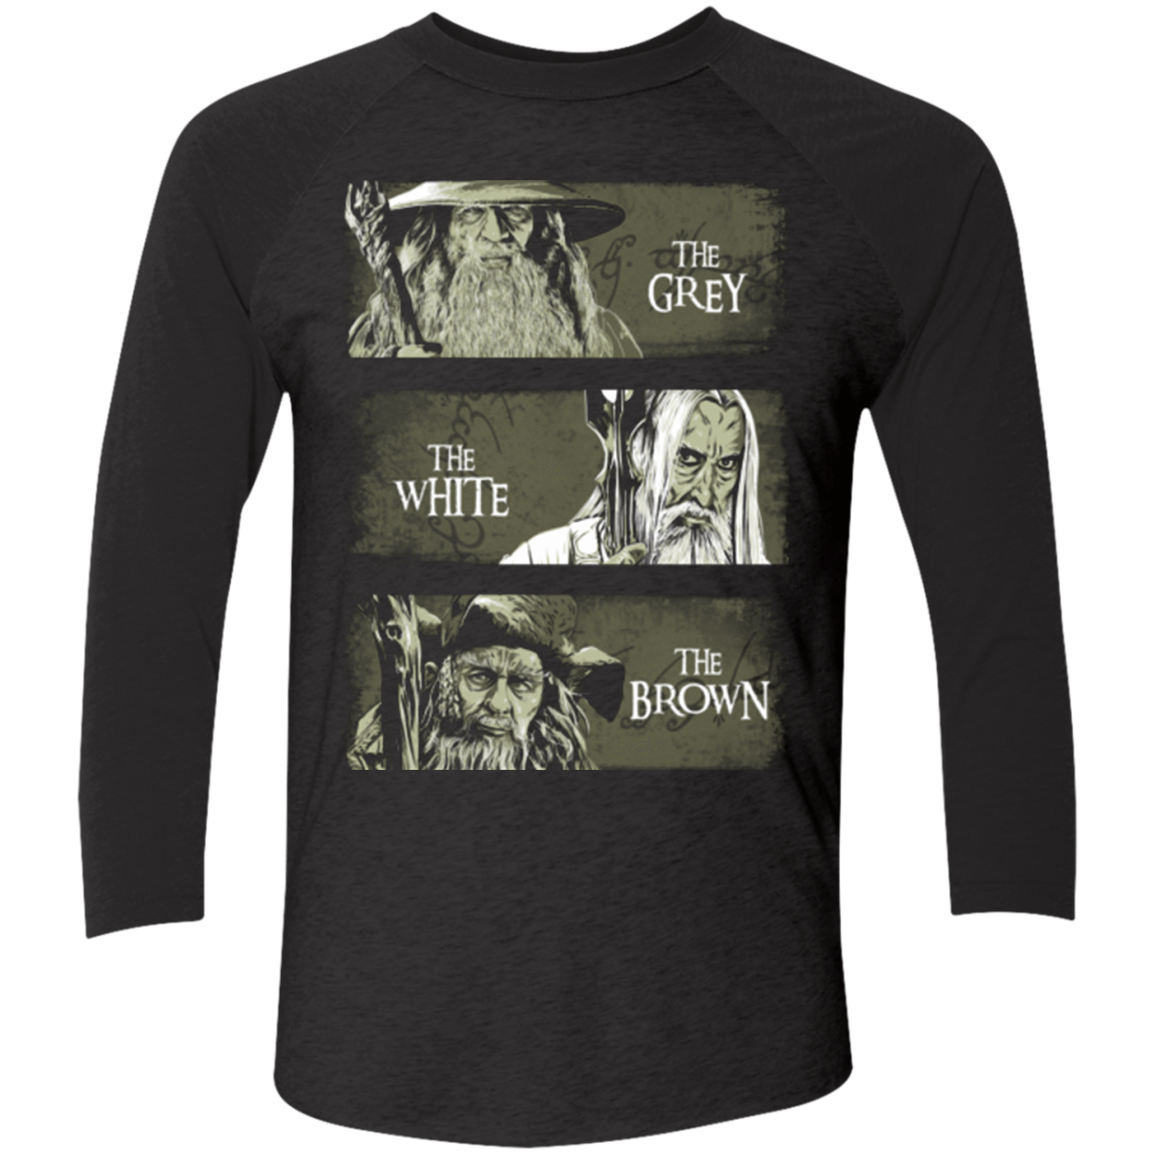 Wizards of Middle Earth Men's Triblend 3/4 Sleeve